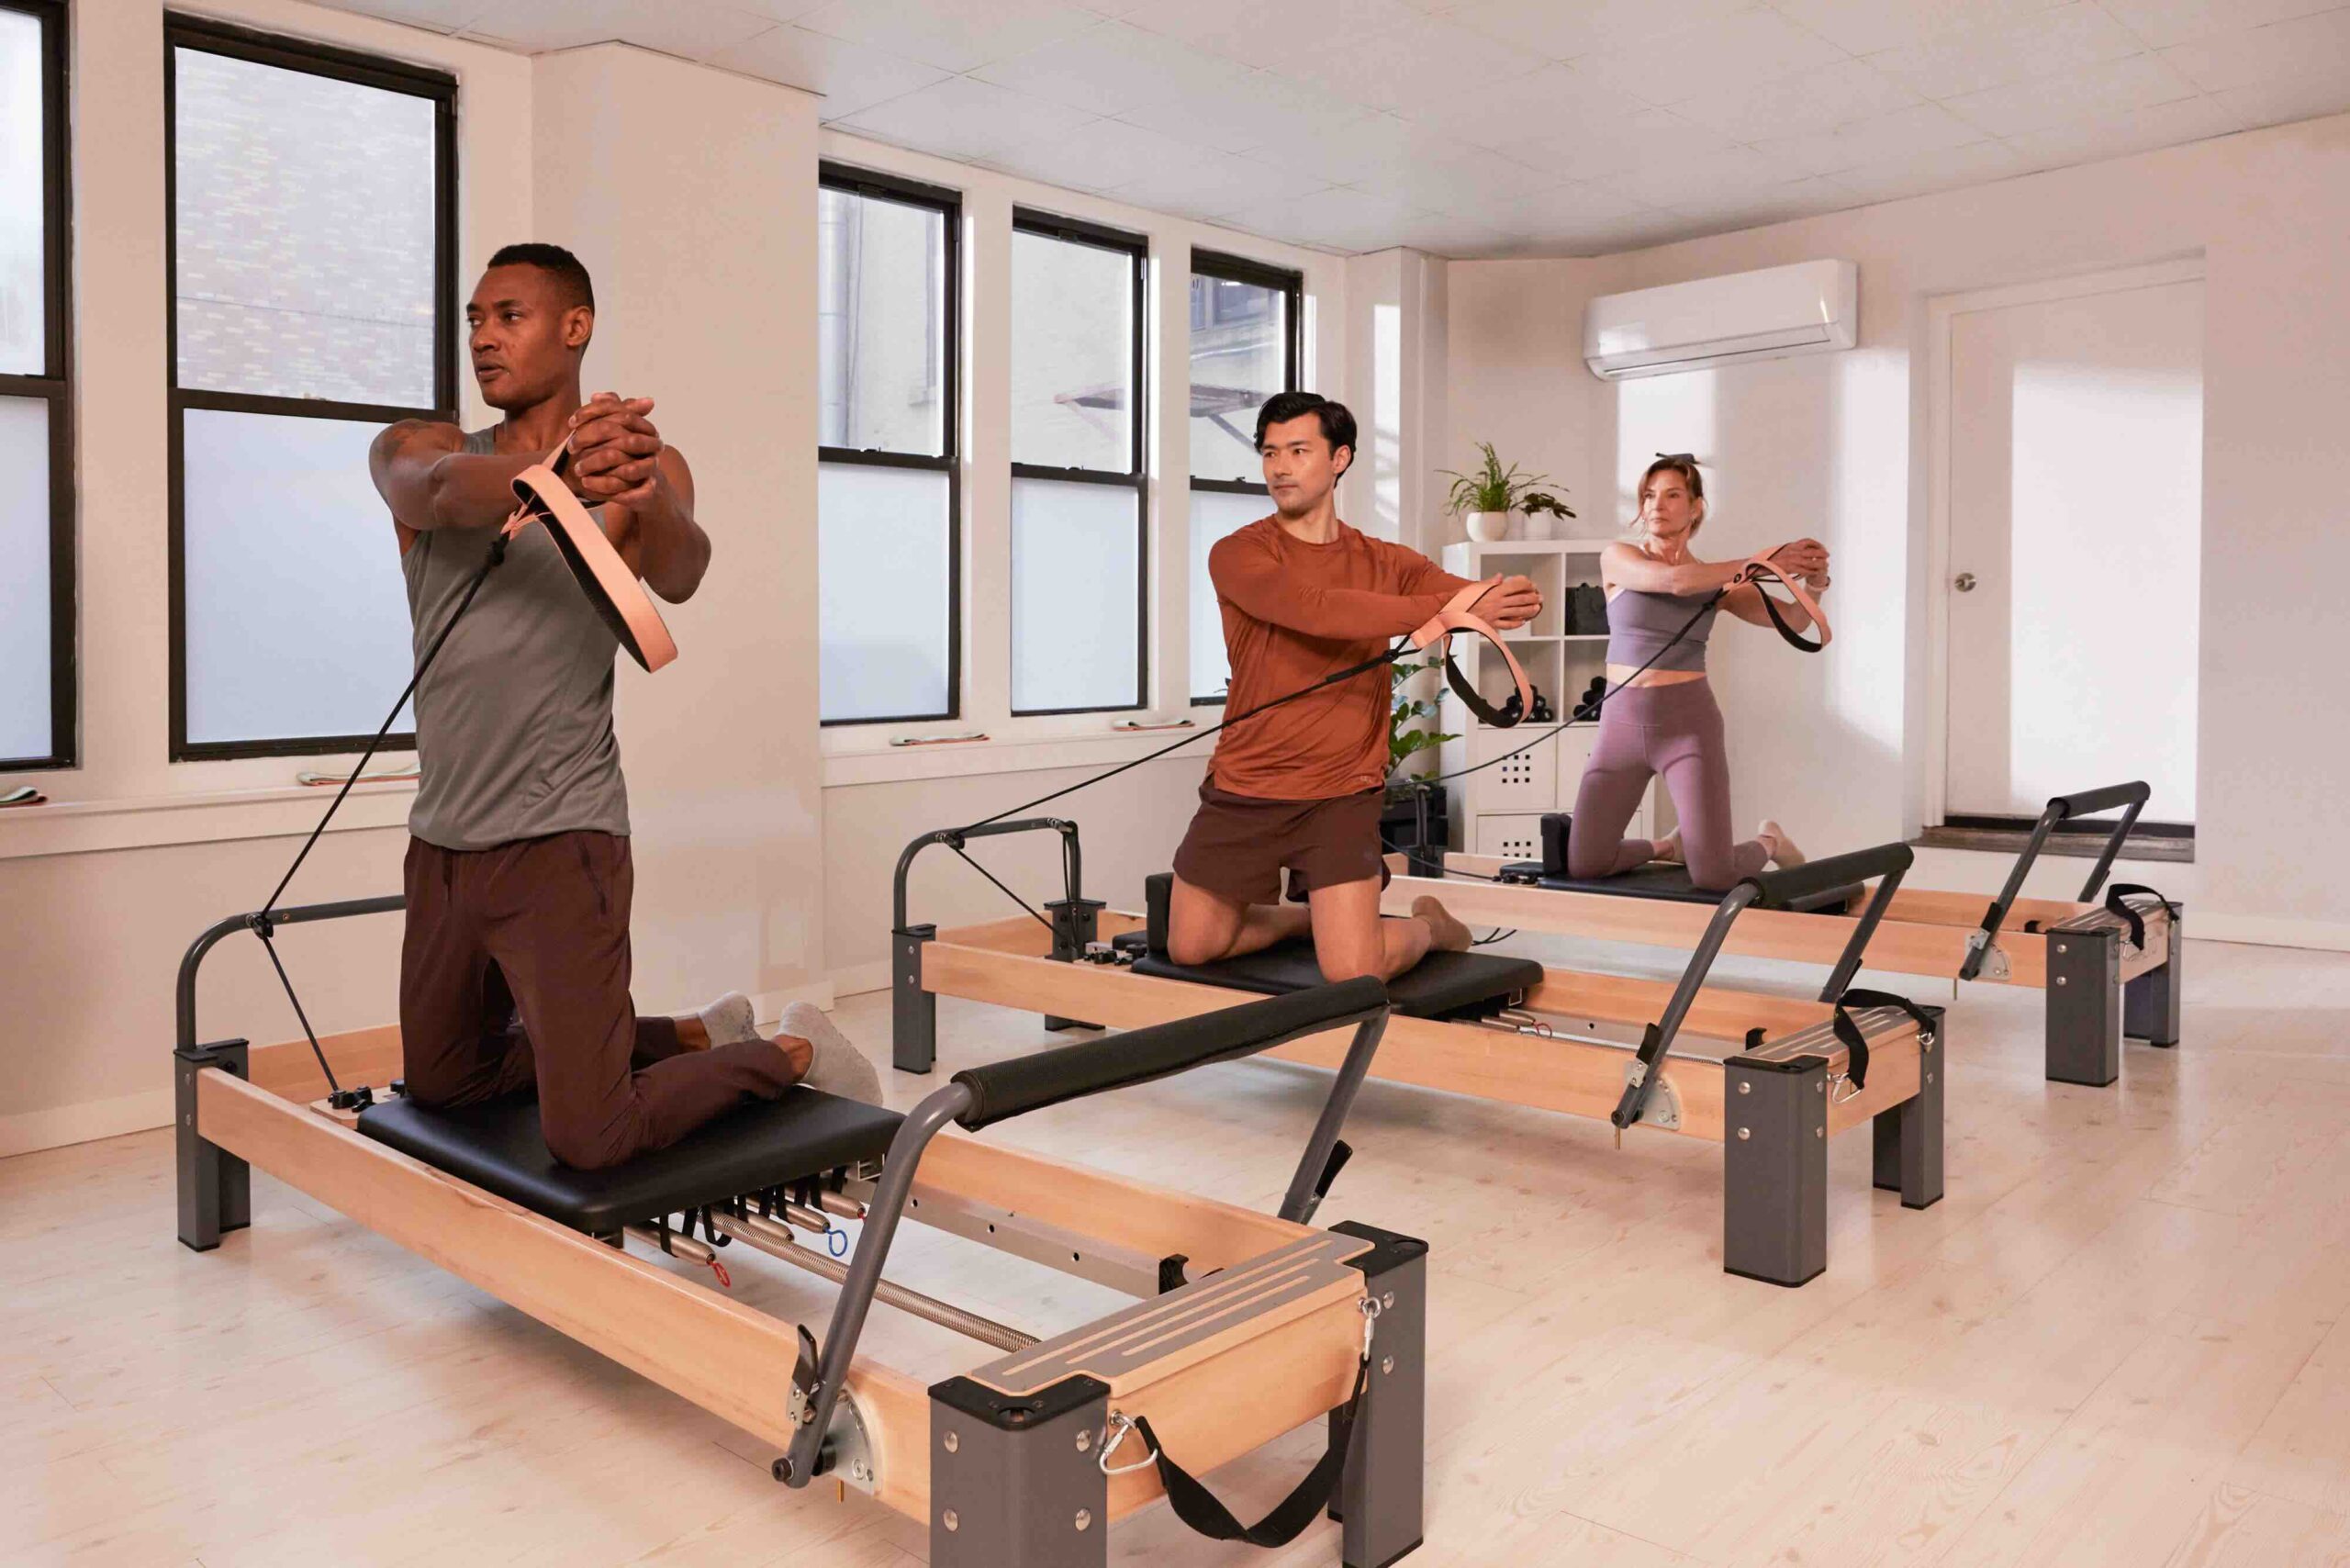 Beginners pilates classes in London  Book a Pilates Class for beginners  Online